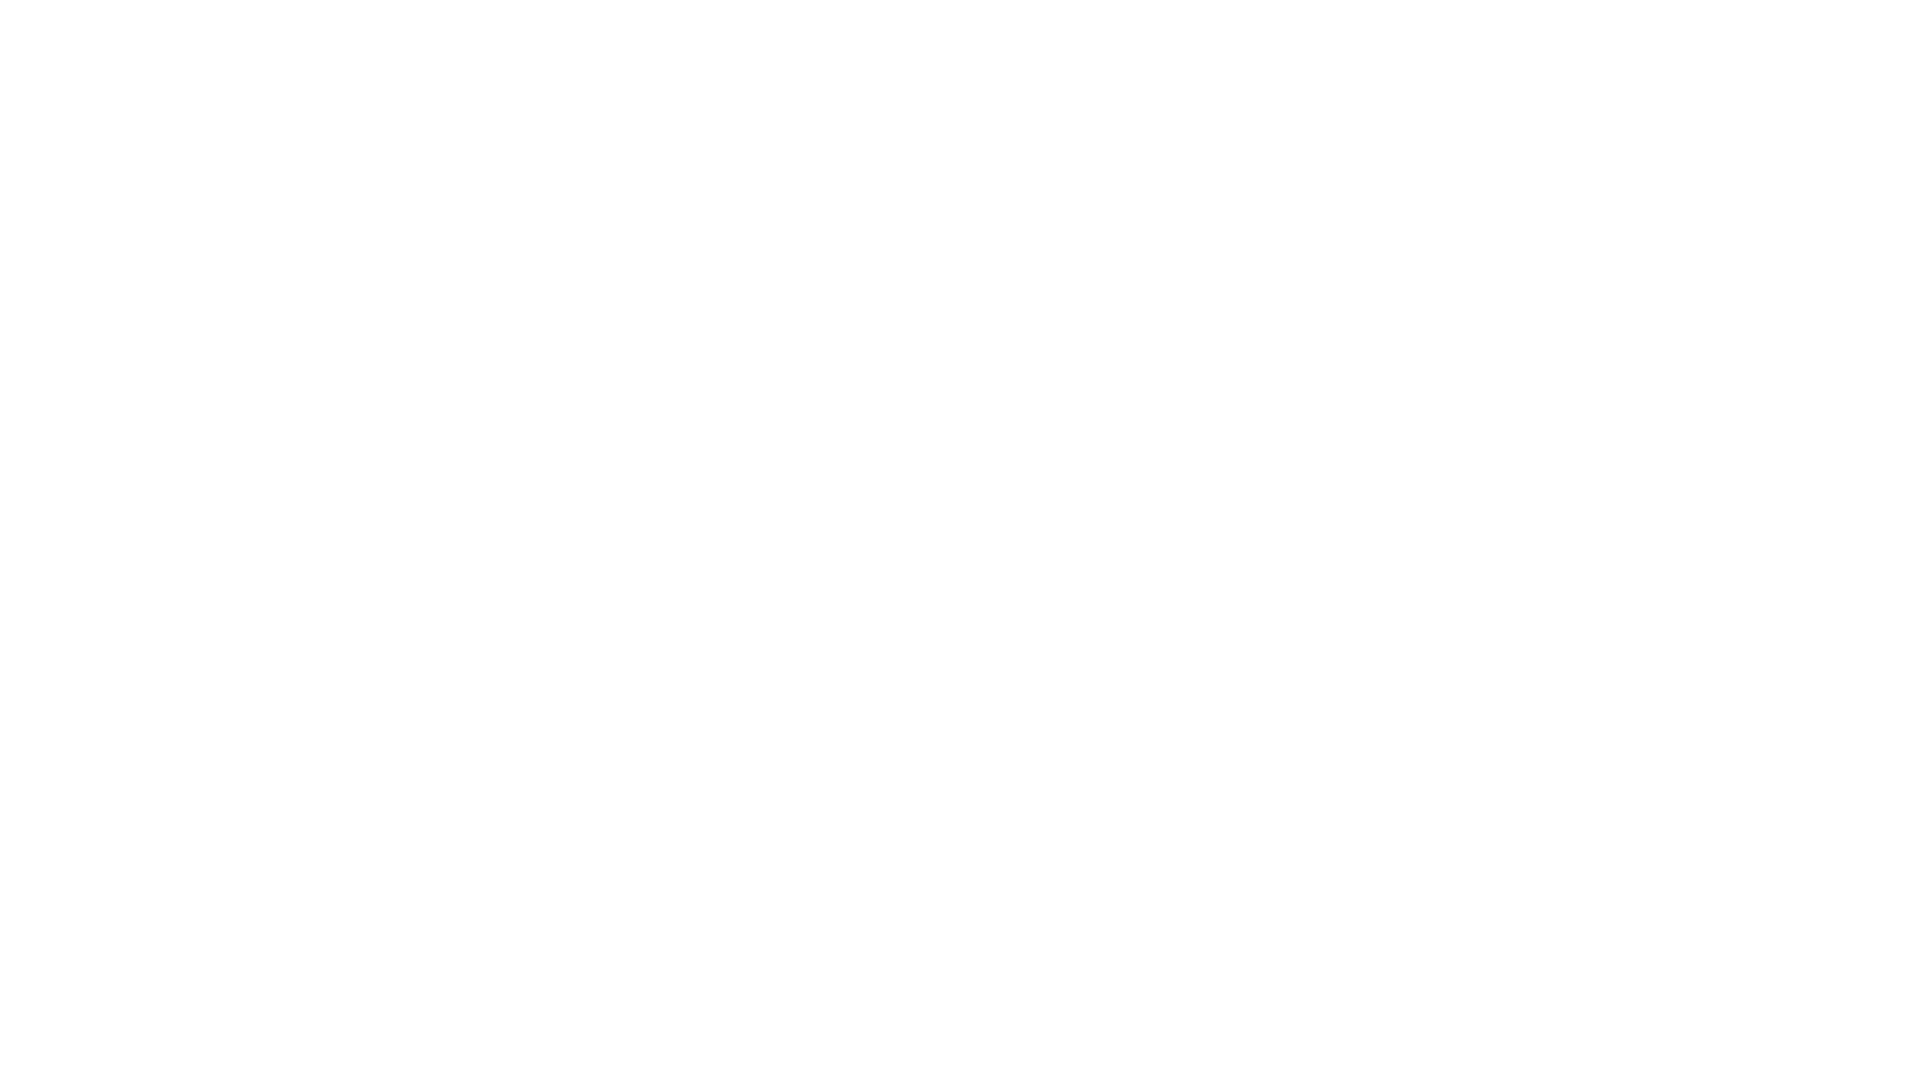 CanzellRealtyWide1080pWhiteTransparent